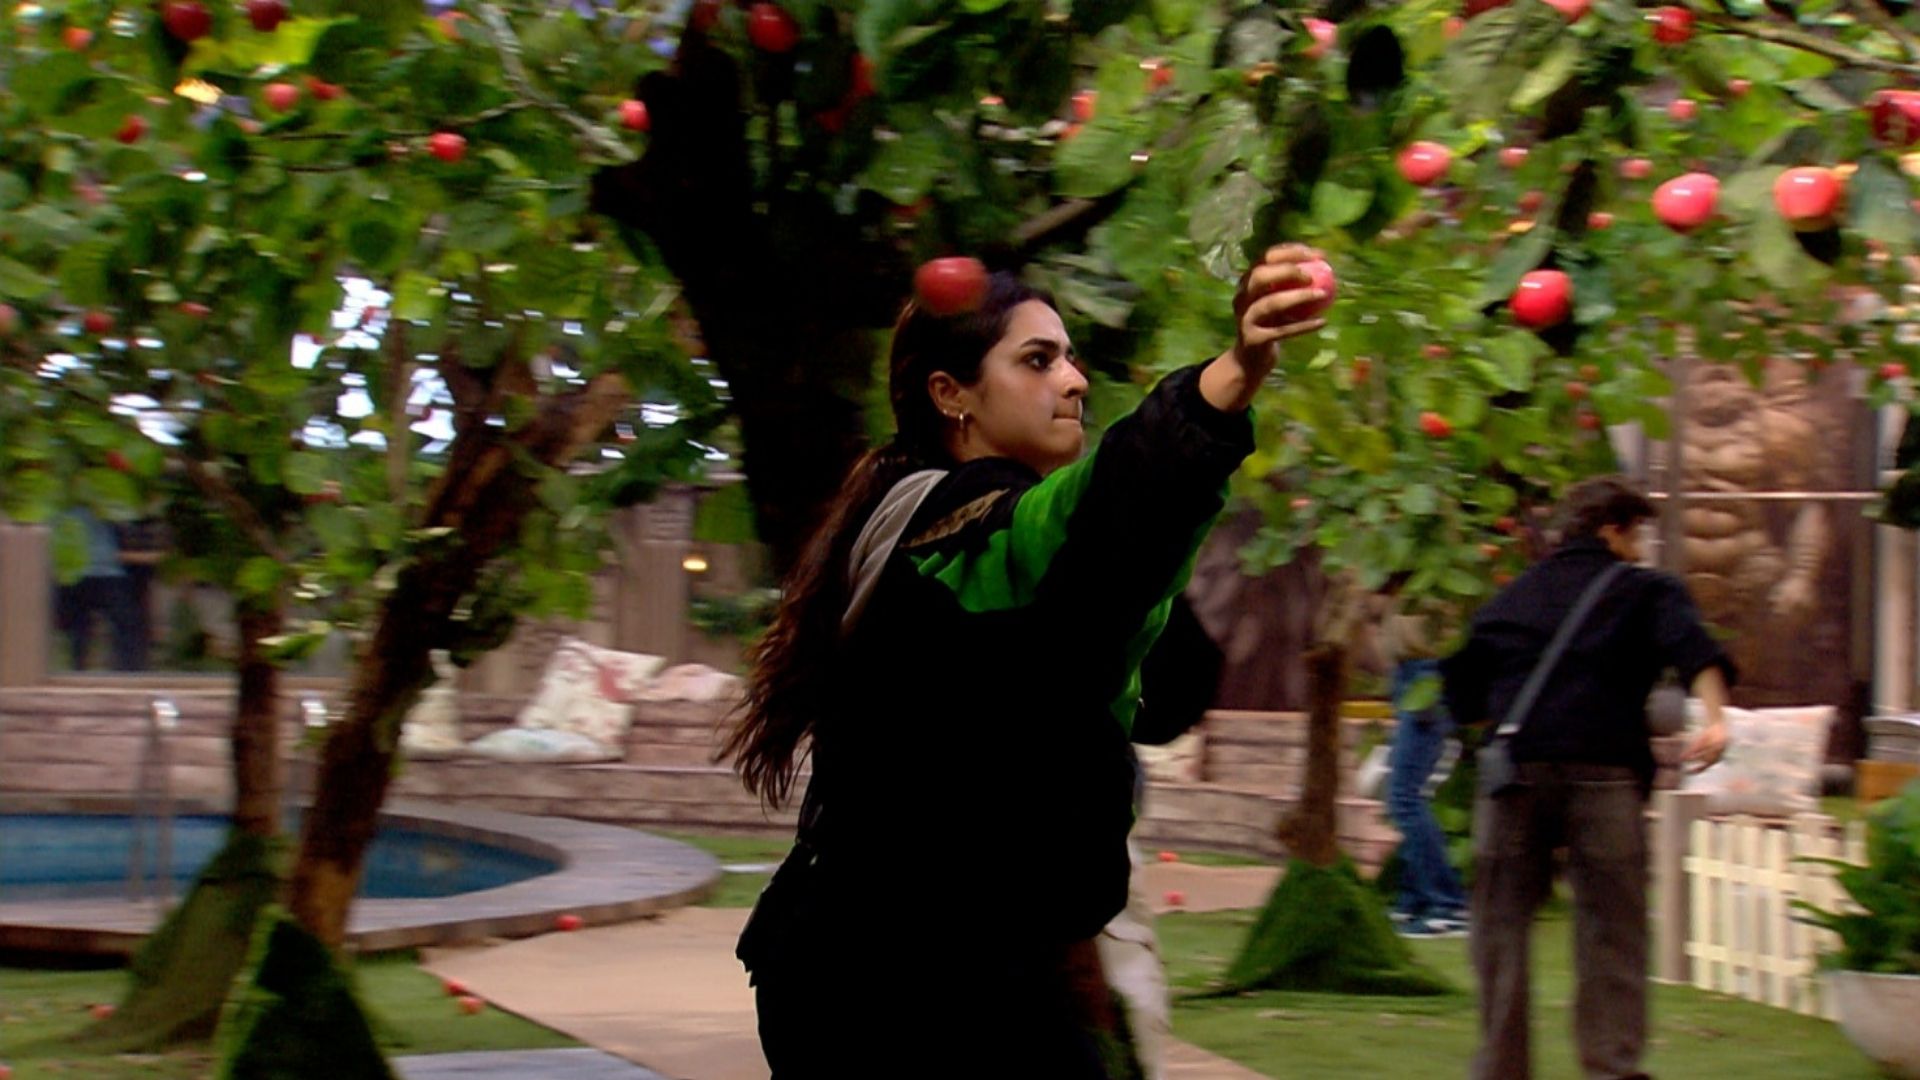 In the latest episode of COLORS BIGG BOSS sparks fly as wild card entrant Ayesha Khan and comedian Munawar Faruqui share flirtatious moments, setting the house abuzz with speculation. Amidst the brewing relationship drama, the quest for captaincy adds a thrilling twist, pitting housemates against each other in a heated apple-picking task.Unveiling Munawar and Ayesha Chemistry Delve into the intriguing dynamics between Munawar Faruqui and Ayesha Khan, exploring how their relationship went from heartbreak to unmistakable chemistry. Housemates share varied opinions, with Aishwarya Sharma suspecting strategic gameplay from Ayesha's side. The plot thickens as Isha Malviya hints at Munawar's growing attraction. Captaincy Ambitions and Teams Revealed Highlight the captaincy task that divides the house into two competitive teams. Introduce the members and touch upon the tension as they vie for the prestigious role. The stakes are high as the captains of the makeshift apple orchard, Munawar Faruqui and Ankita Lokhande, hold the power to approve or reject the packed apple boxes. Clash of Teams and Task Controversies Dive into the chaos as both teams race against time, accompanied by the beats of Chikni Chameli. Explore the allegations of unfairness and the heated exchanges over task rules. Uncover the drama that unfolds in the quest for victory, leaving viewers on the edge of their seats. The Climax: Who Emerges Victorious? Build suspense as the blog approaches its climax. Analyze the events leading up to the final decision, keeping readers hooked on the question of which team will emerge victorious. Tease the revelation of the captain of the house for the week. Conclusion: Wrap up the blog with a thrilling conclusion, summarizing the episode's highlights. Leave readers eagerly anticipating the next'BIGG BOSS' episode, wondering how the evolving relationships and strategic gameplay will shape the dynamics inside the house.